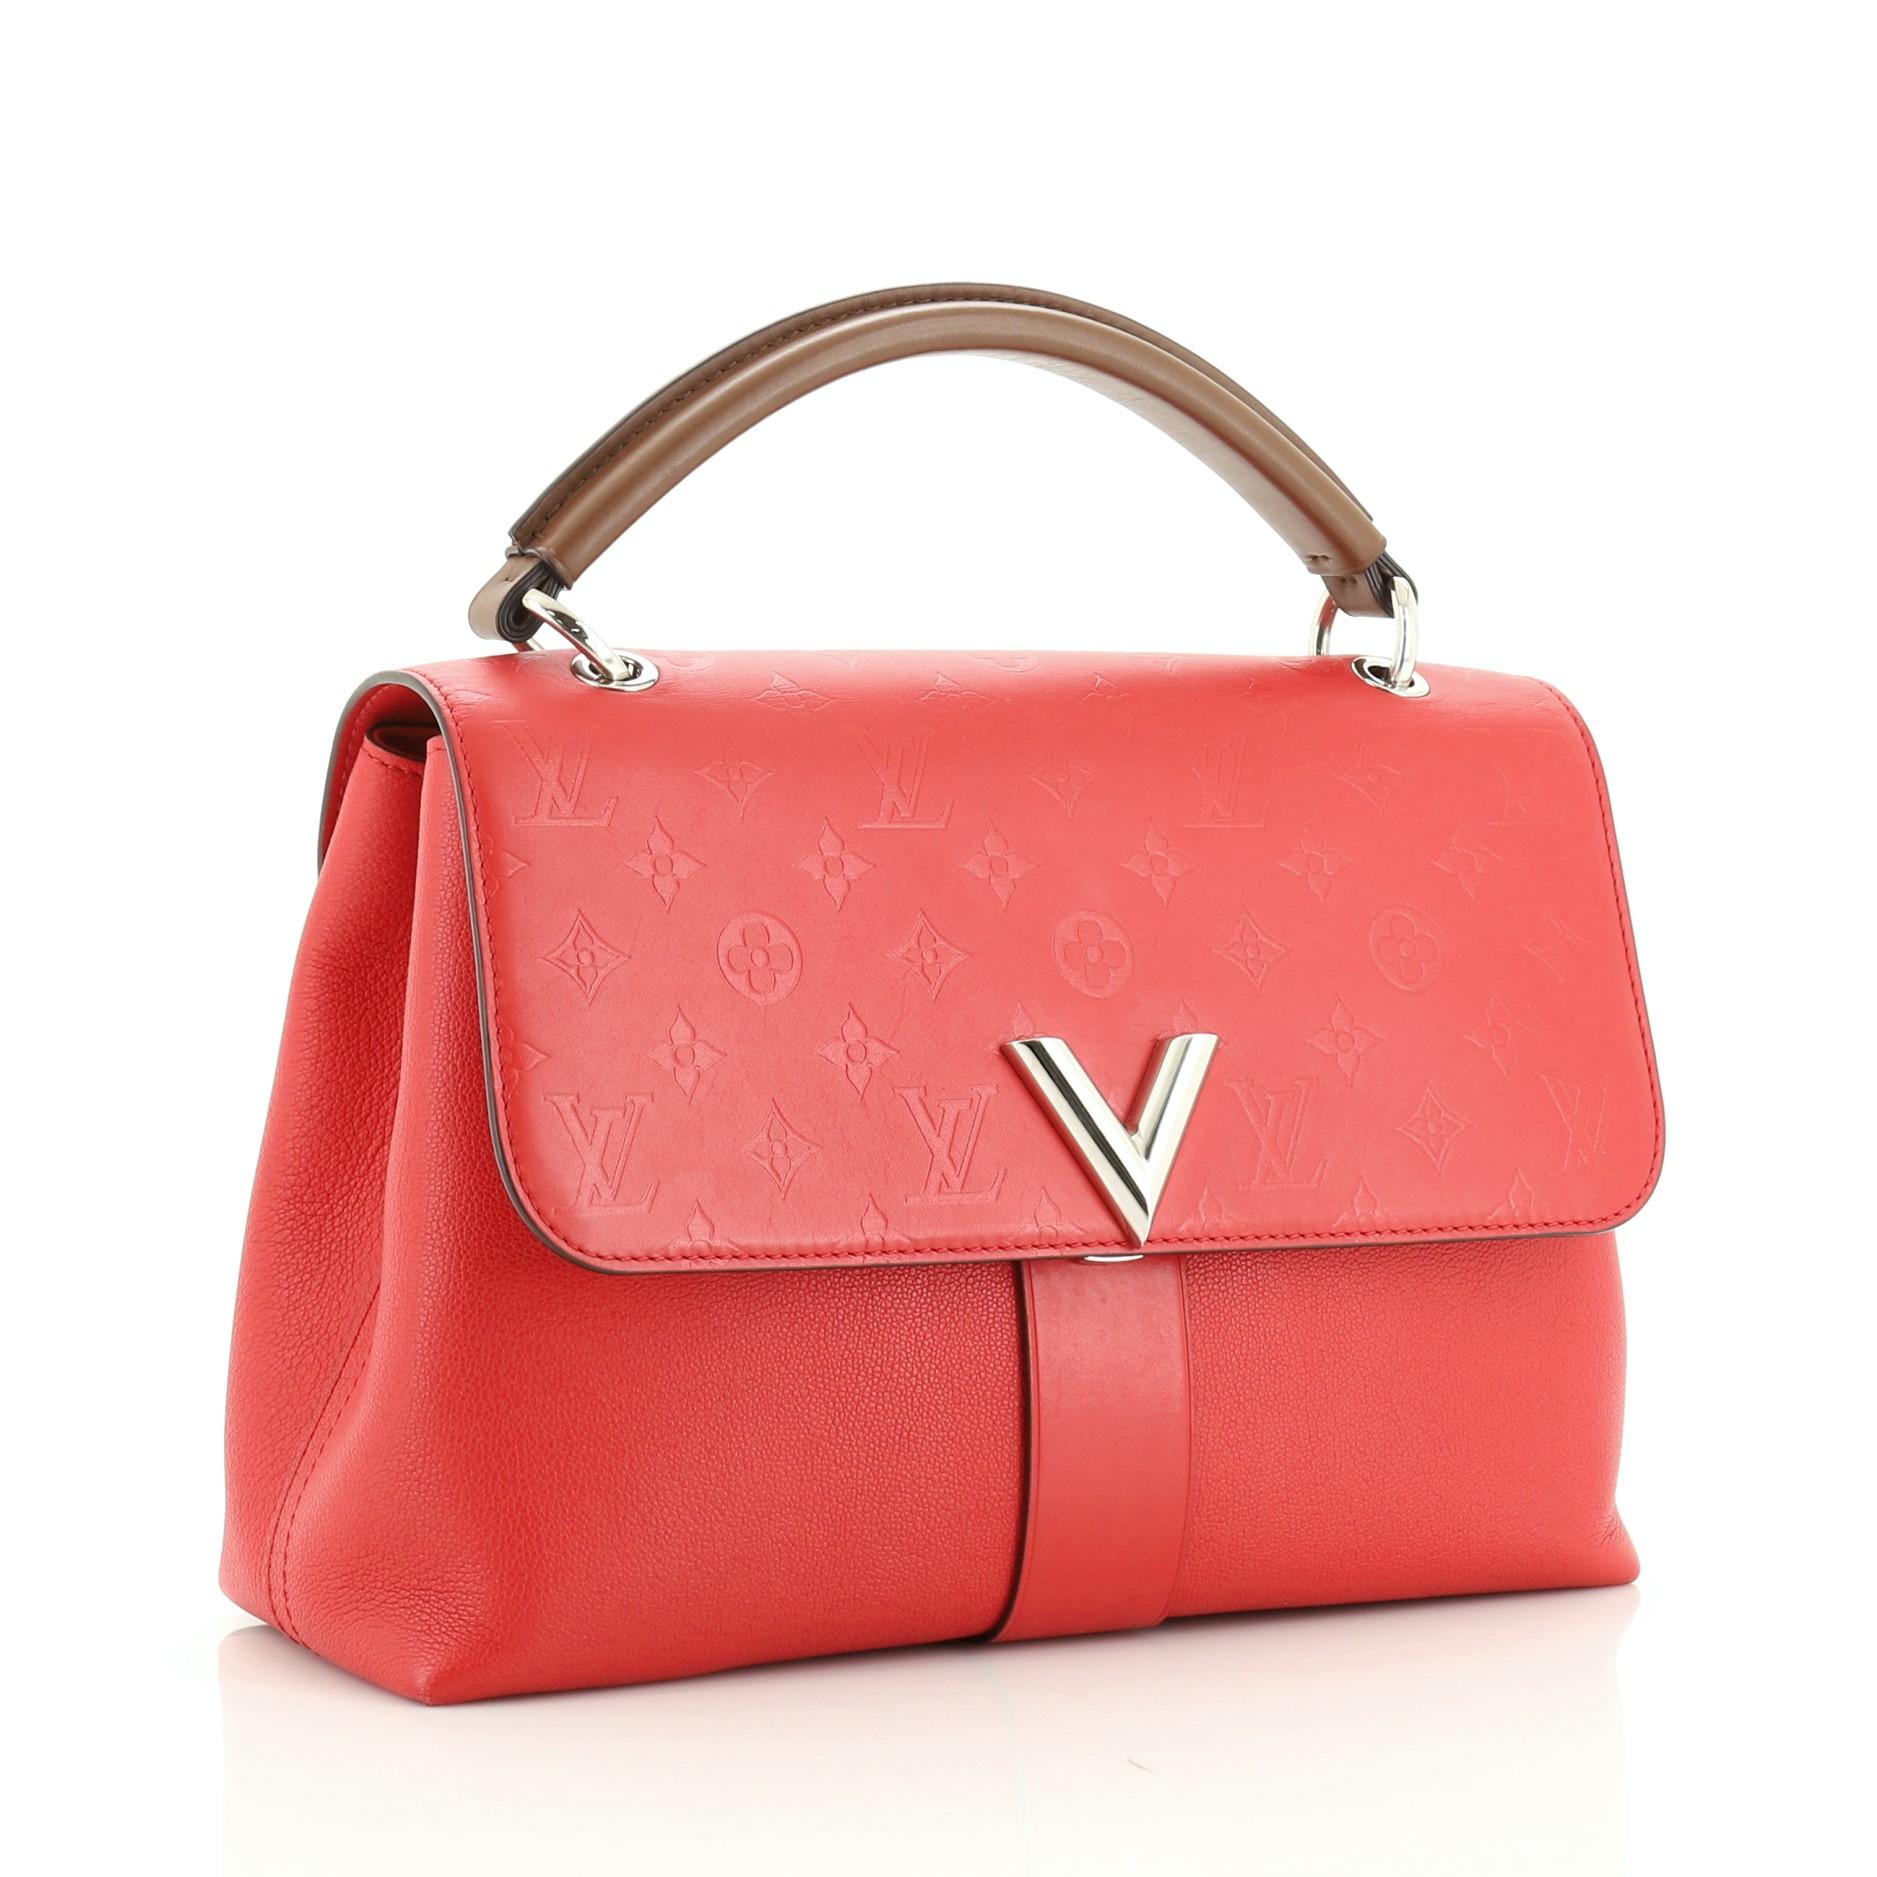 This Louis Vuitton Very One Handle Bag Monogram Leather, crafted in red monogram leather, features rolled leather handle, V logo at front flap and silver-tone hardware. Its flap opens to a red microfiber interior divided into two compartments with a